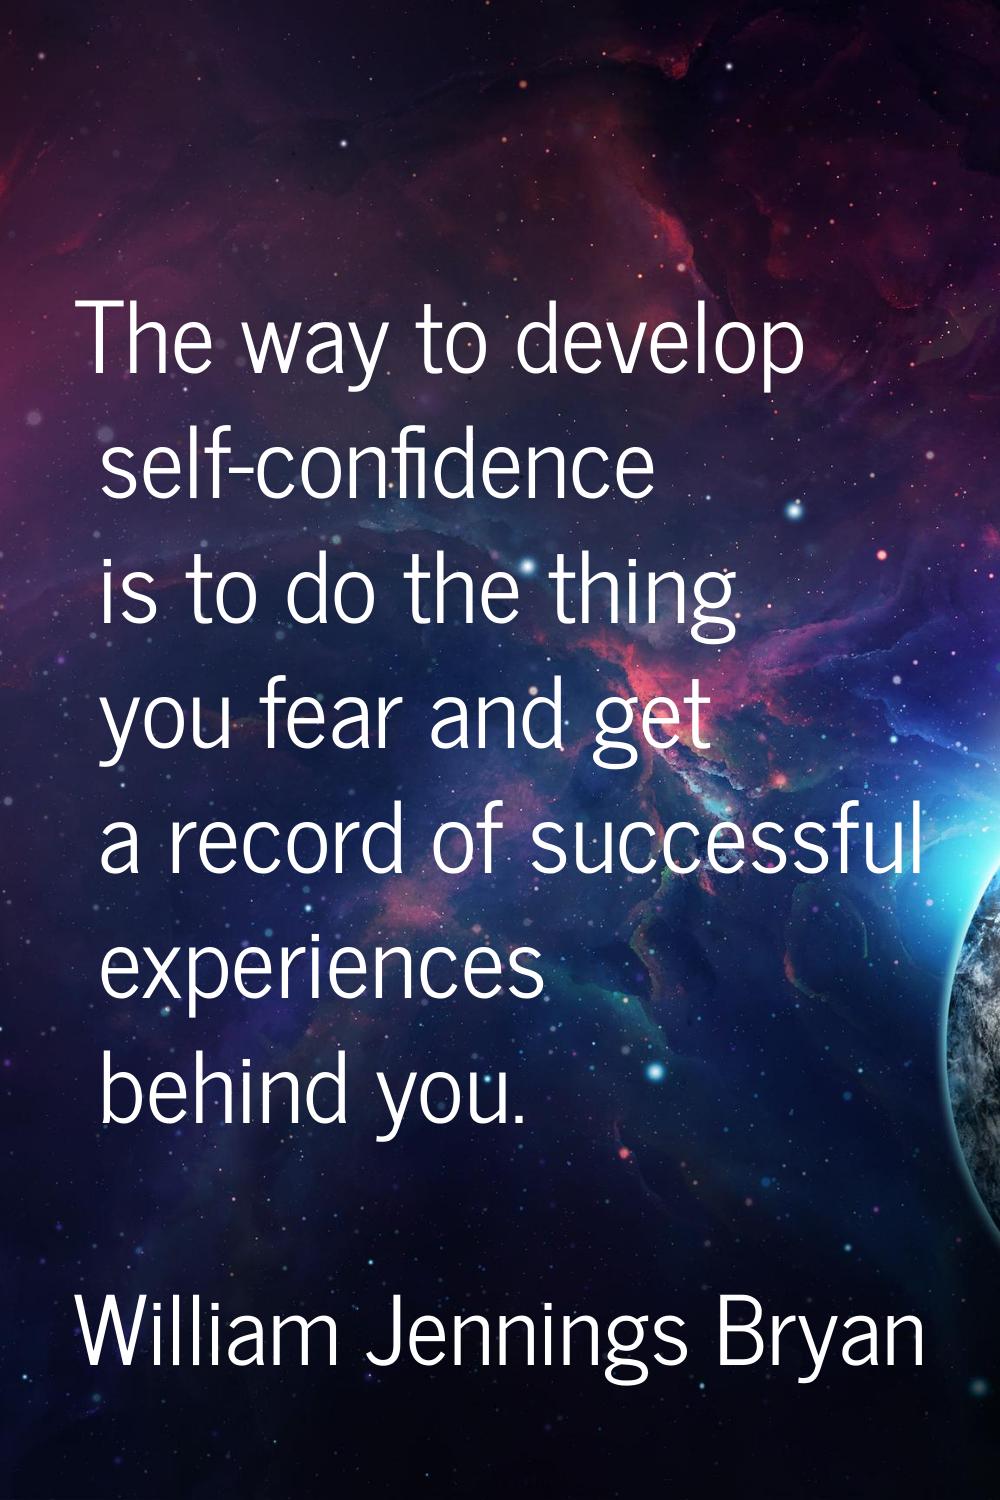 The way to develop self-confidence is to do the thing you fear and get a record of successful exper